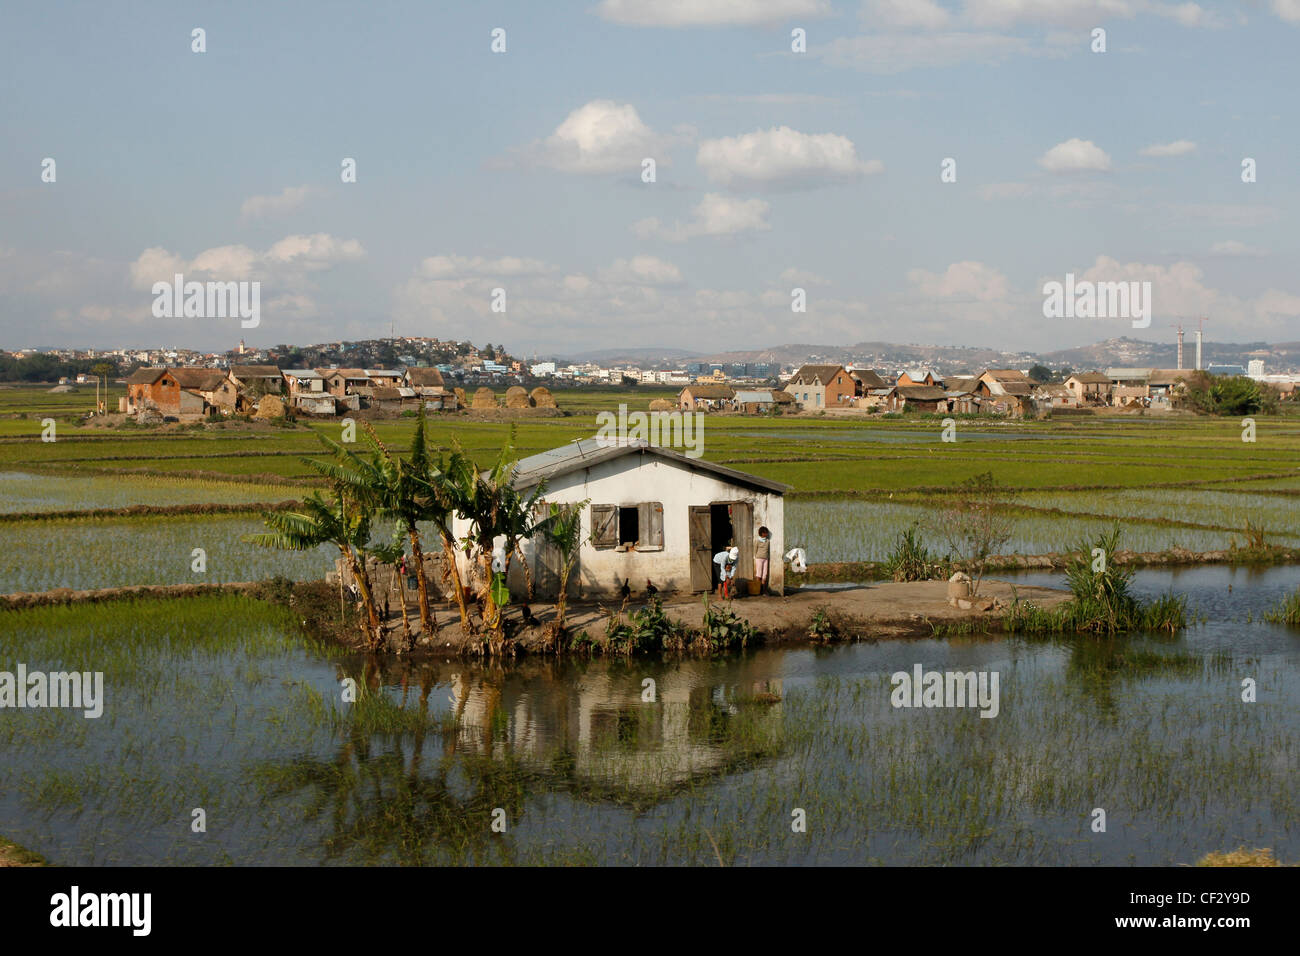 Rice paddy fields and agriculture on the outskirts of Antananarivo. Madagascar. Stock Photo